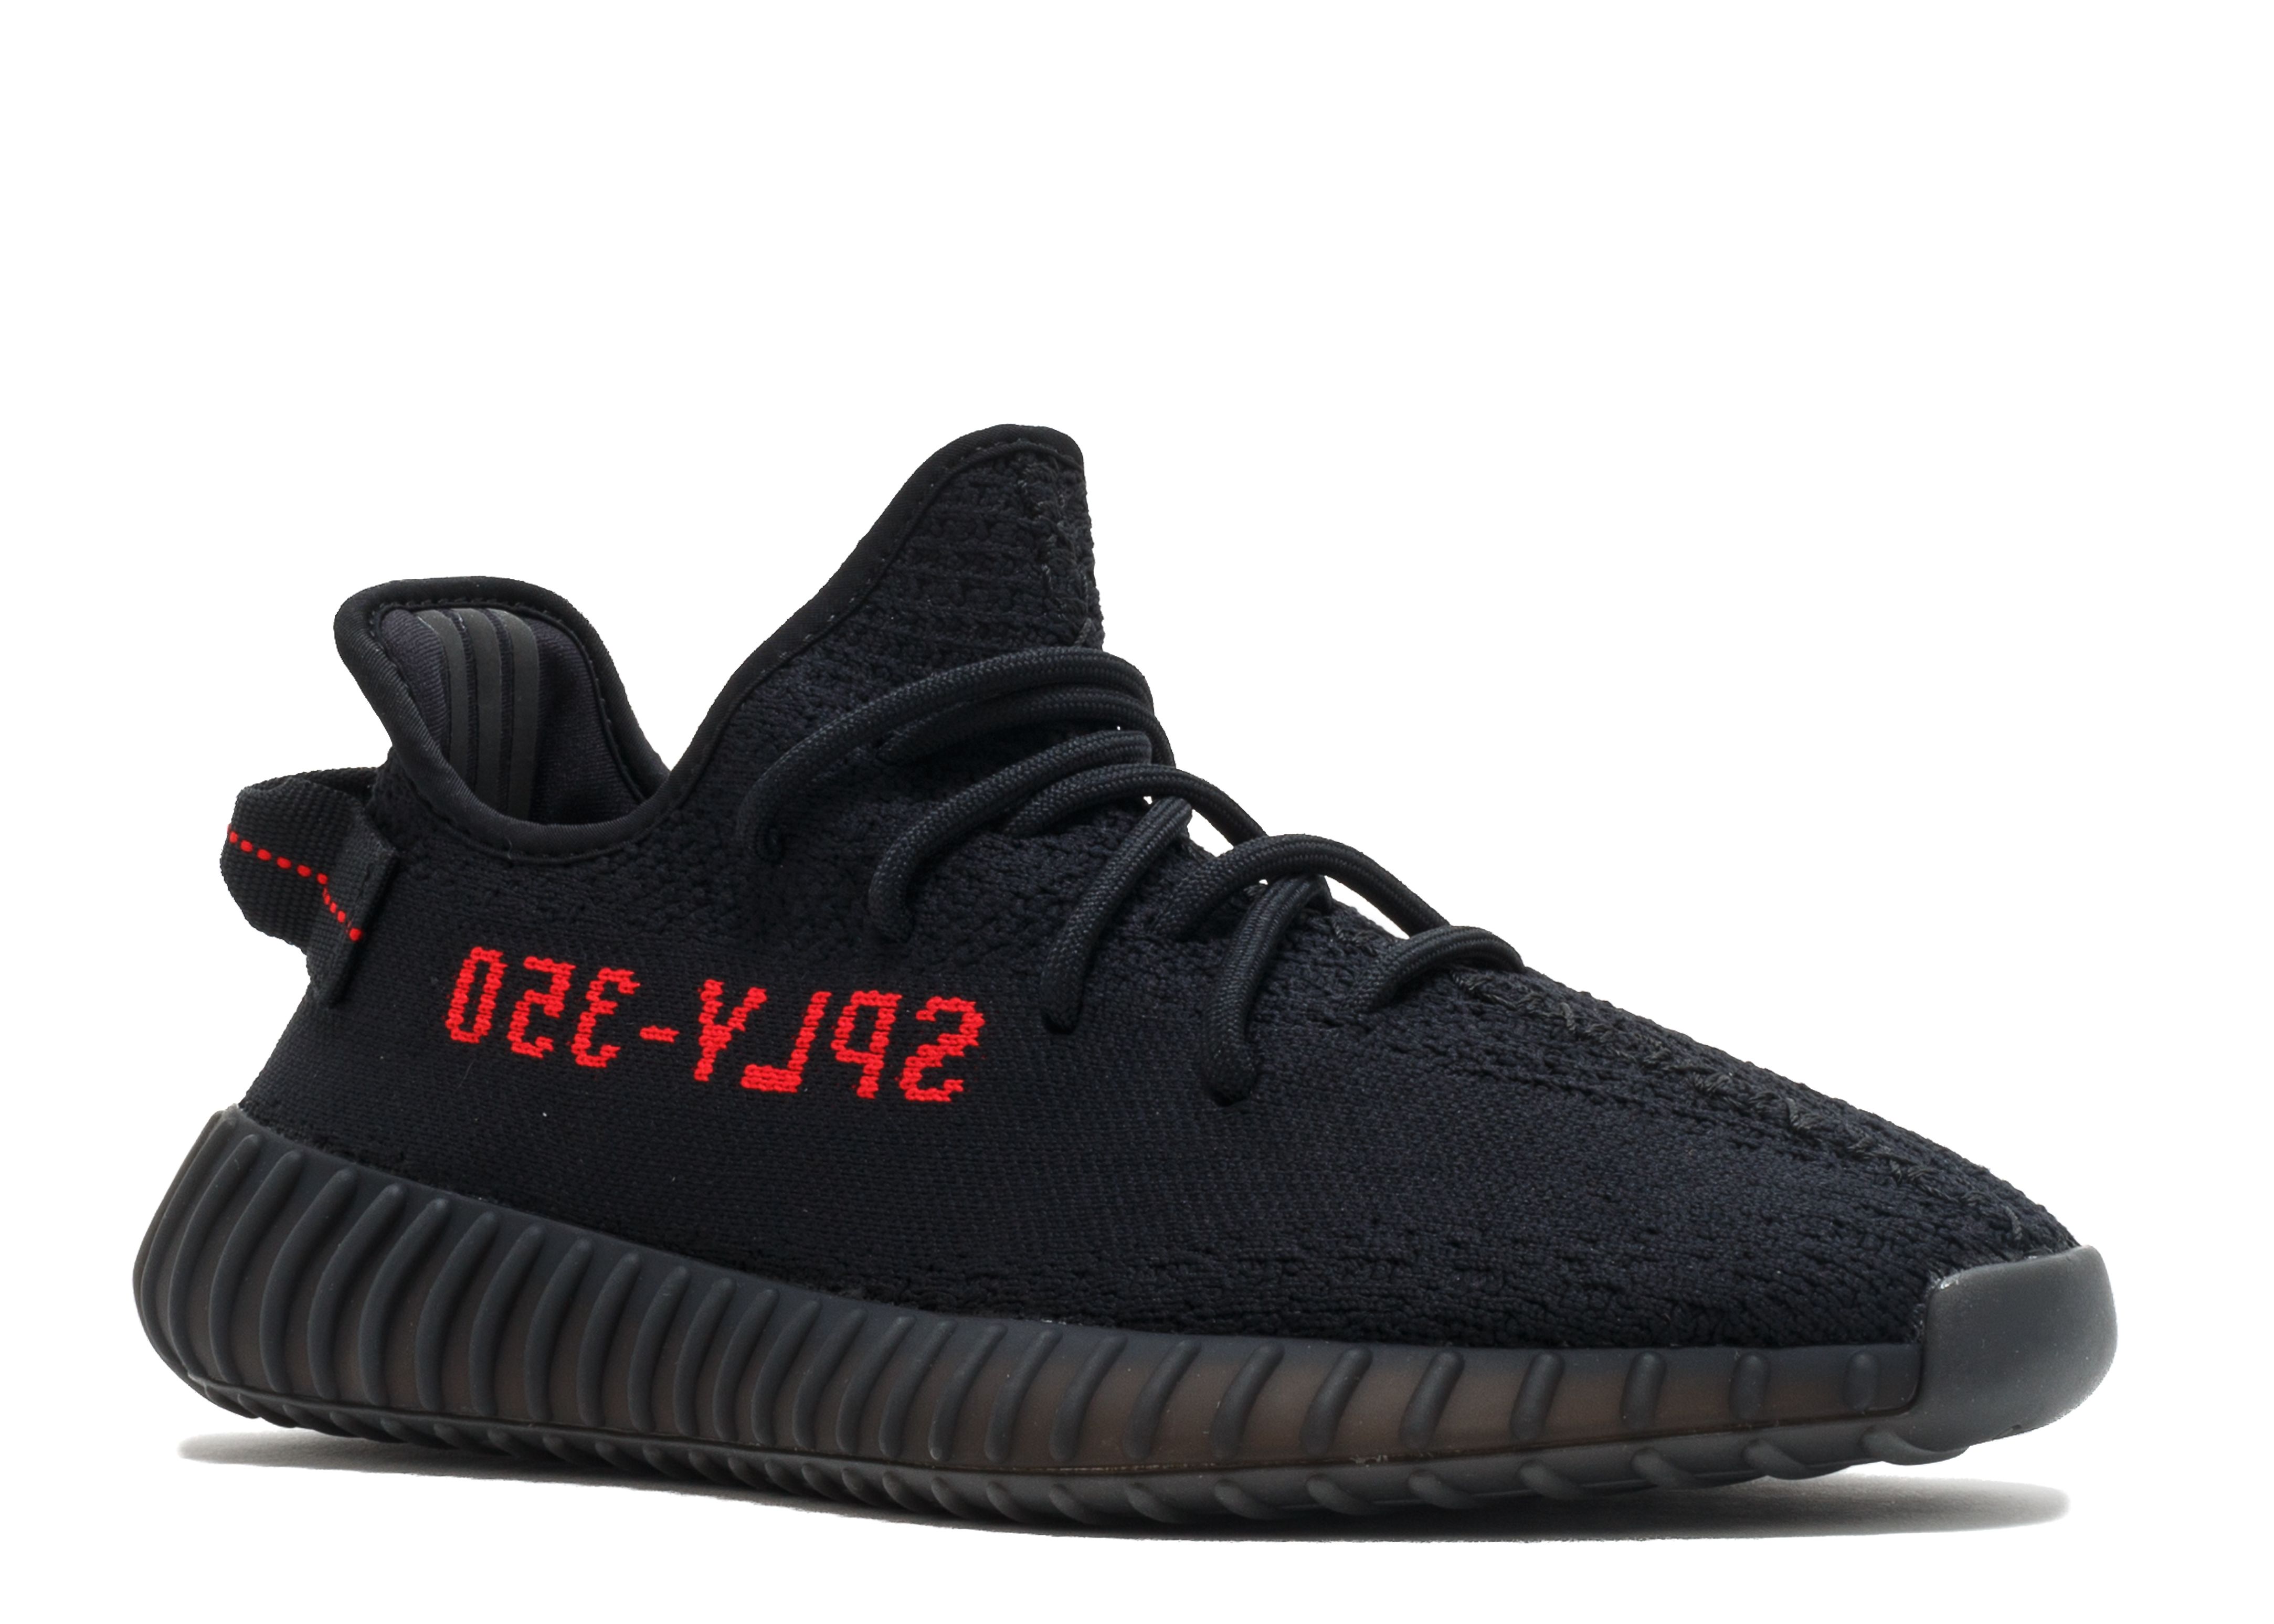 91% Off Yeezy boost 350 v2 black red infant review uk Near Me